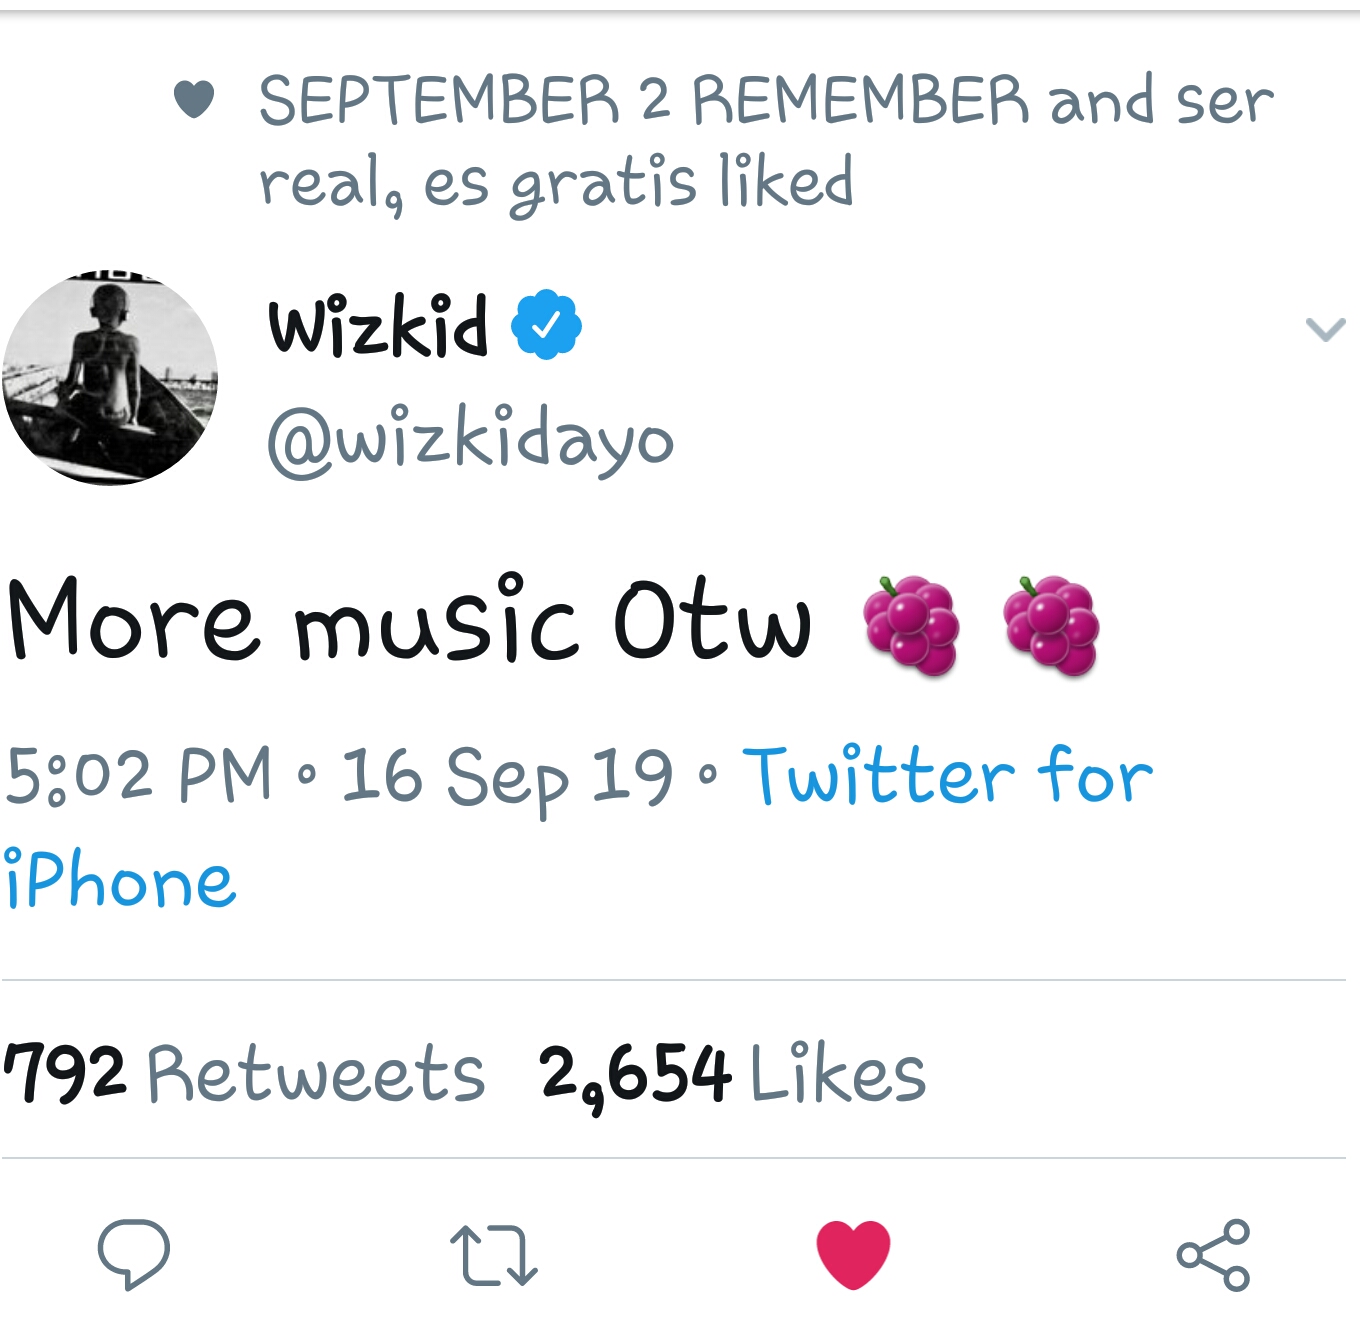 Wizkid promises to release more bangers